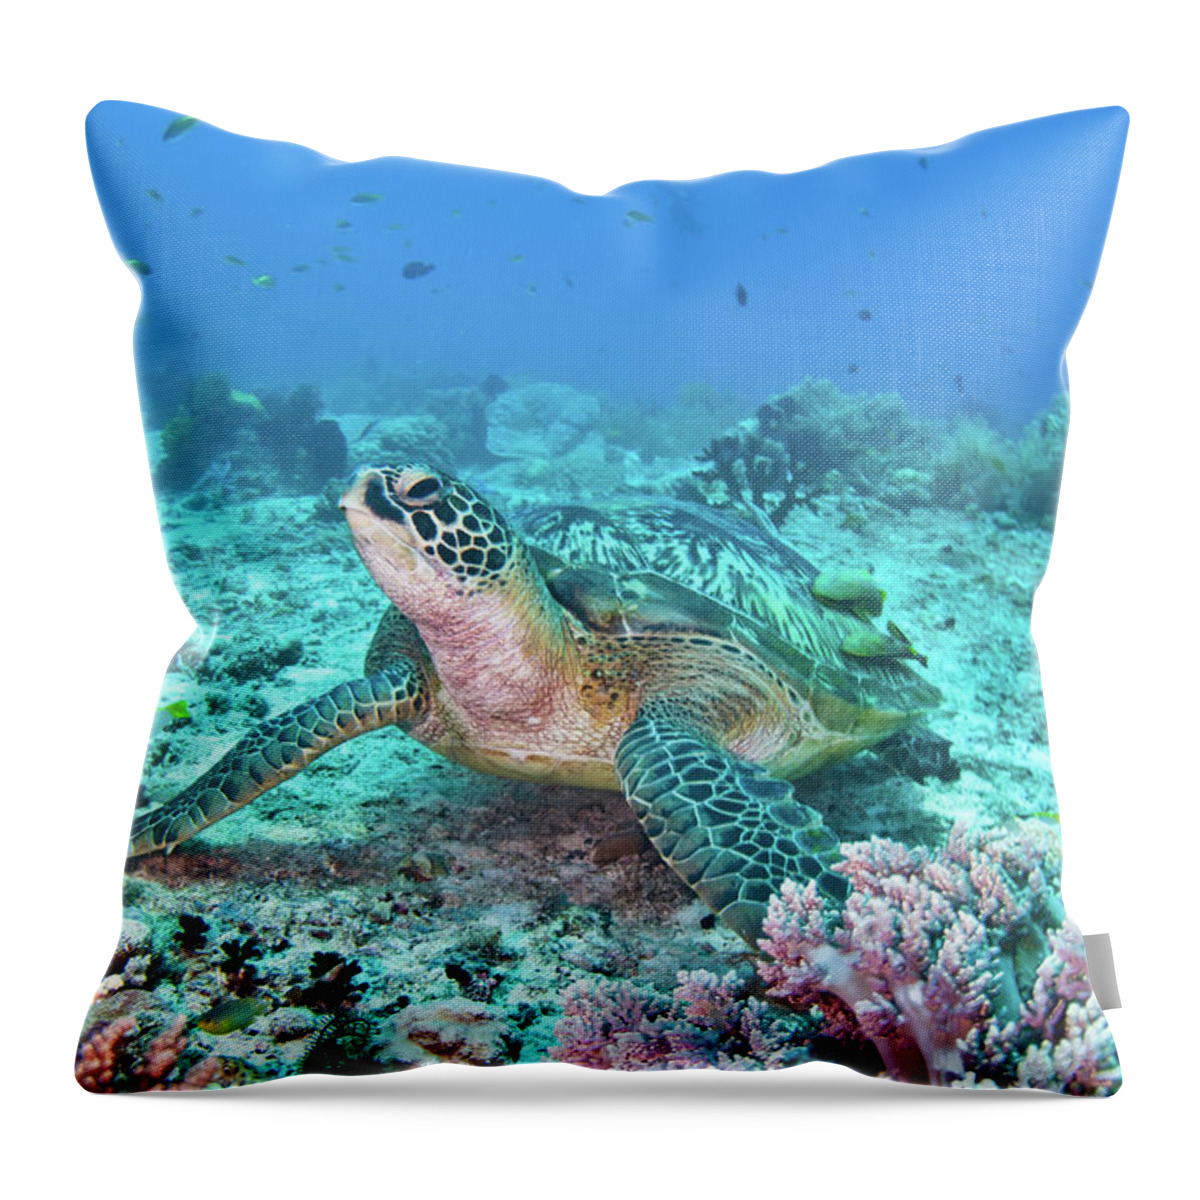 Underwater Throw Pillow featuring the photograph Green Turtle by Wendy A. Capili